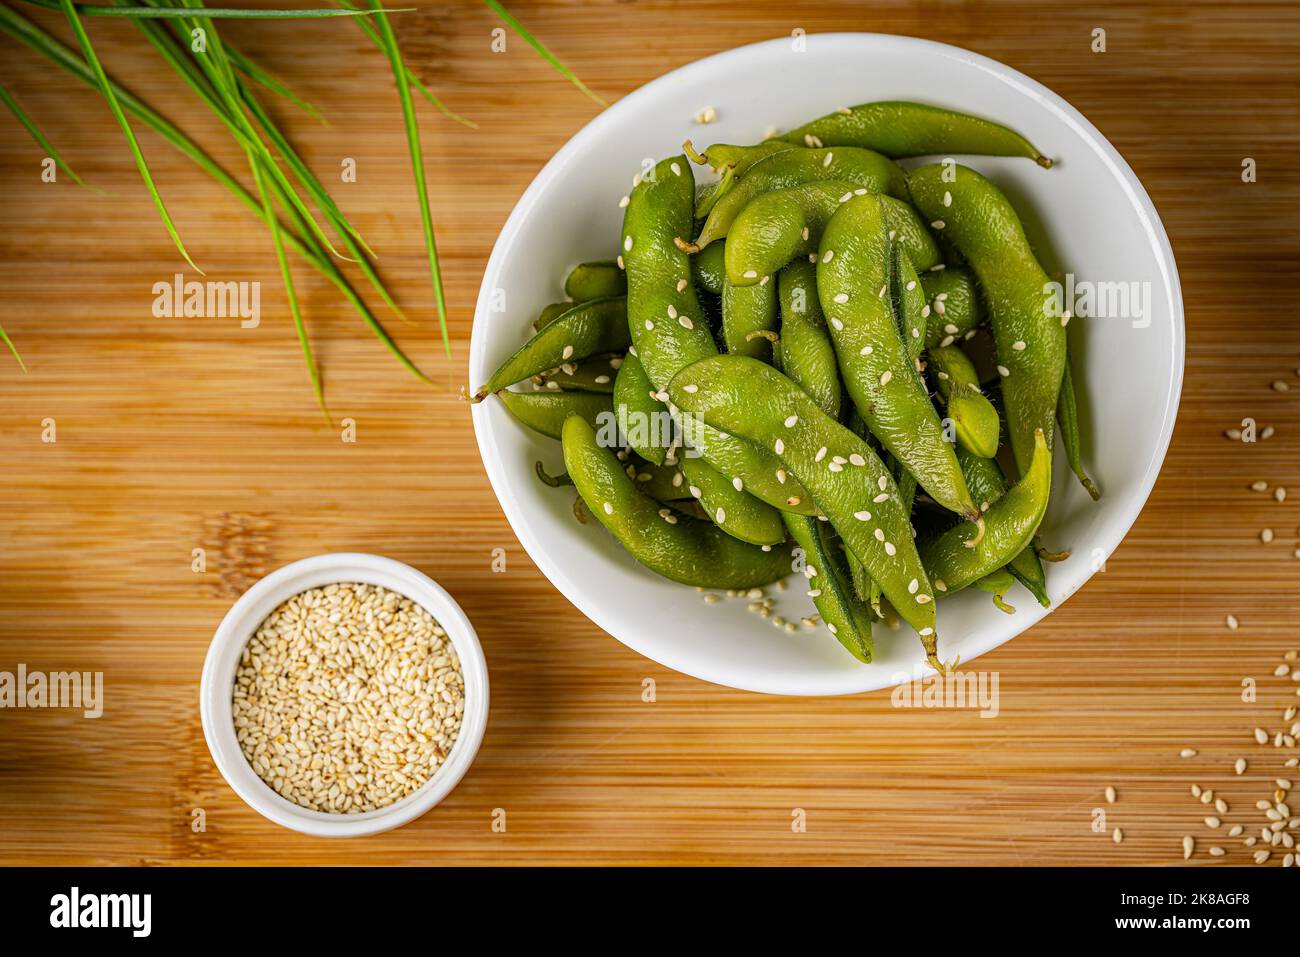 Salad with fresh green peas on plate Stock Photo